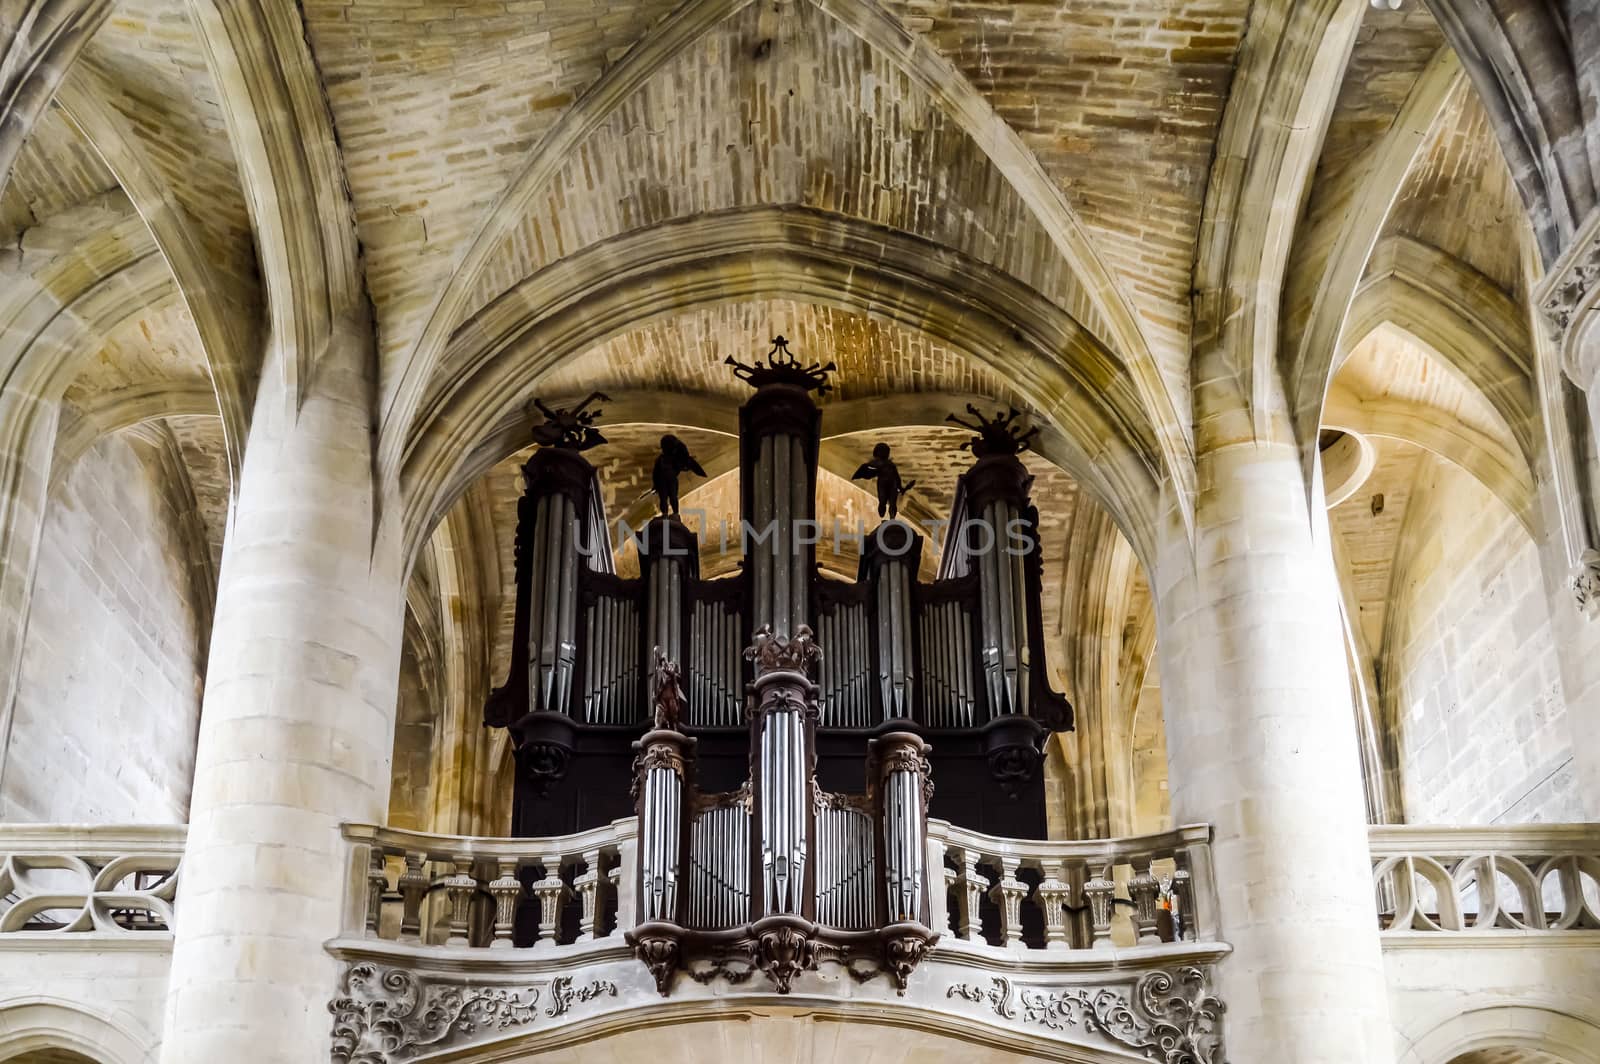 Grandstand organ of the Saint Etienne church. France, europe.